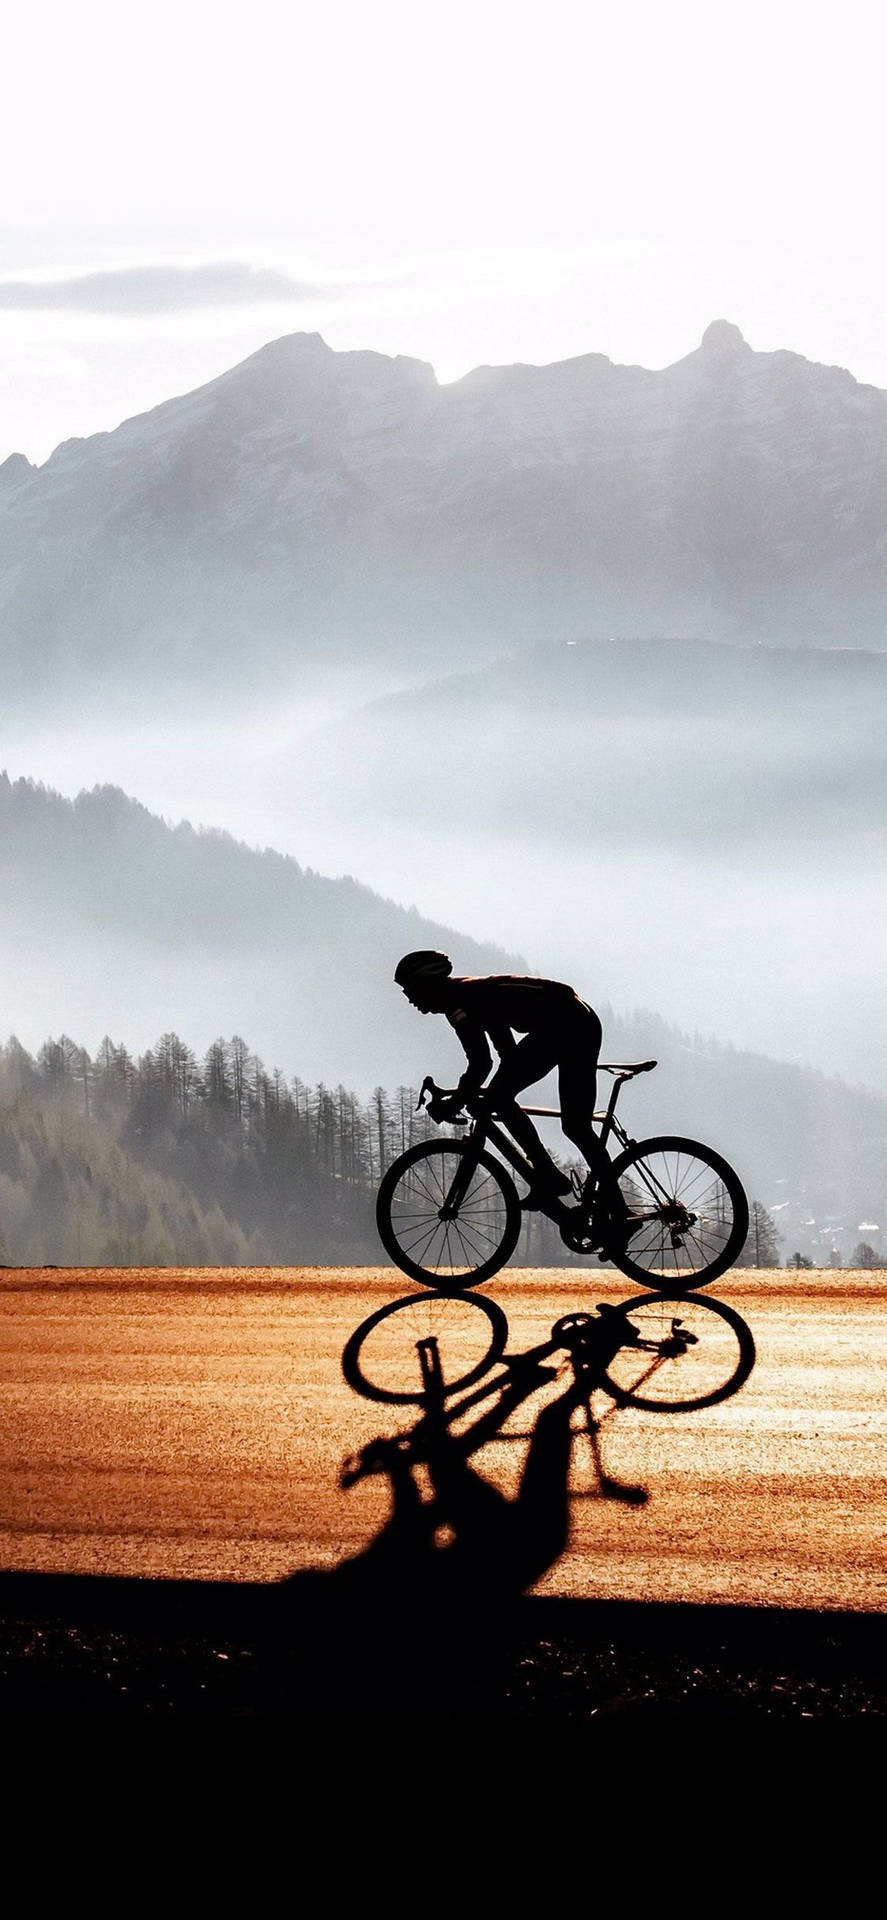 Picturesque Bicycle iPhone Cyclist Silhouette Wallpaper